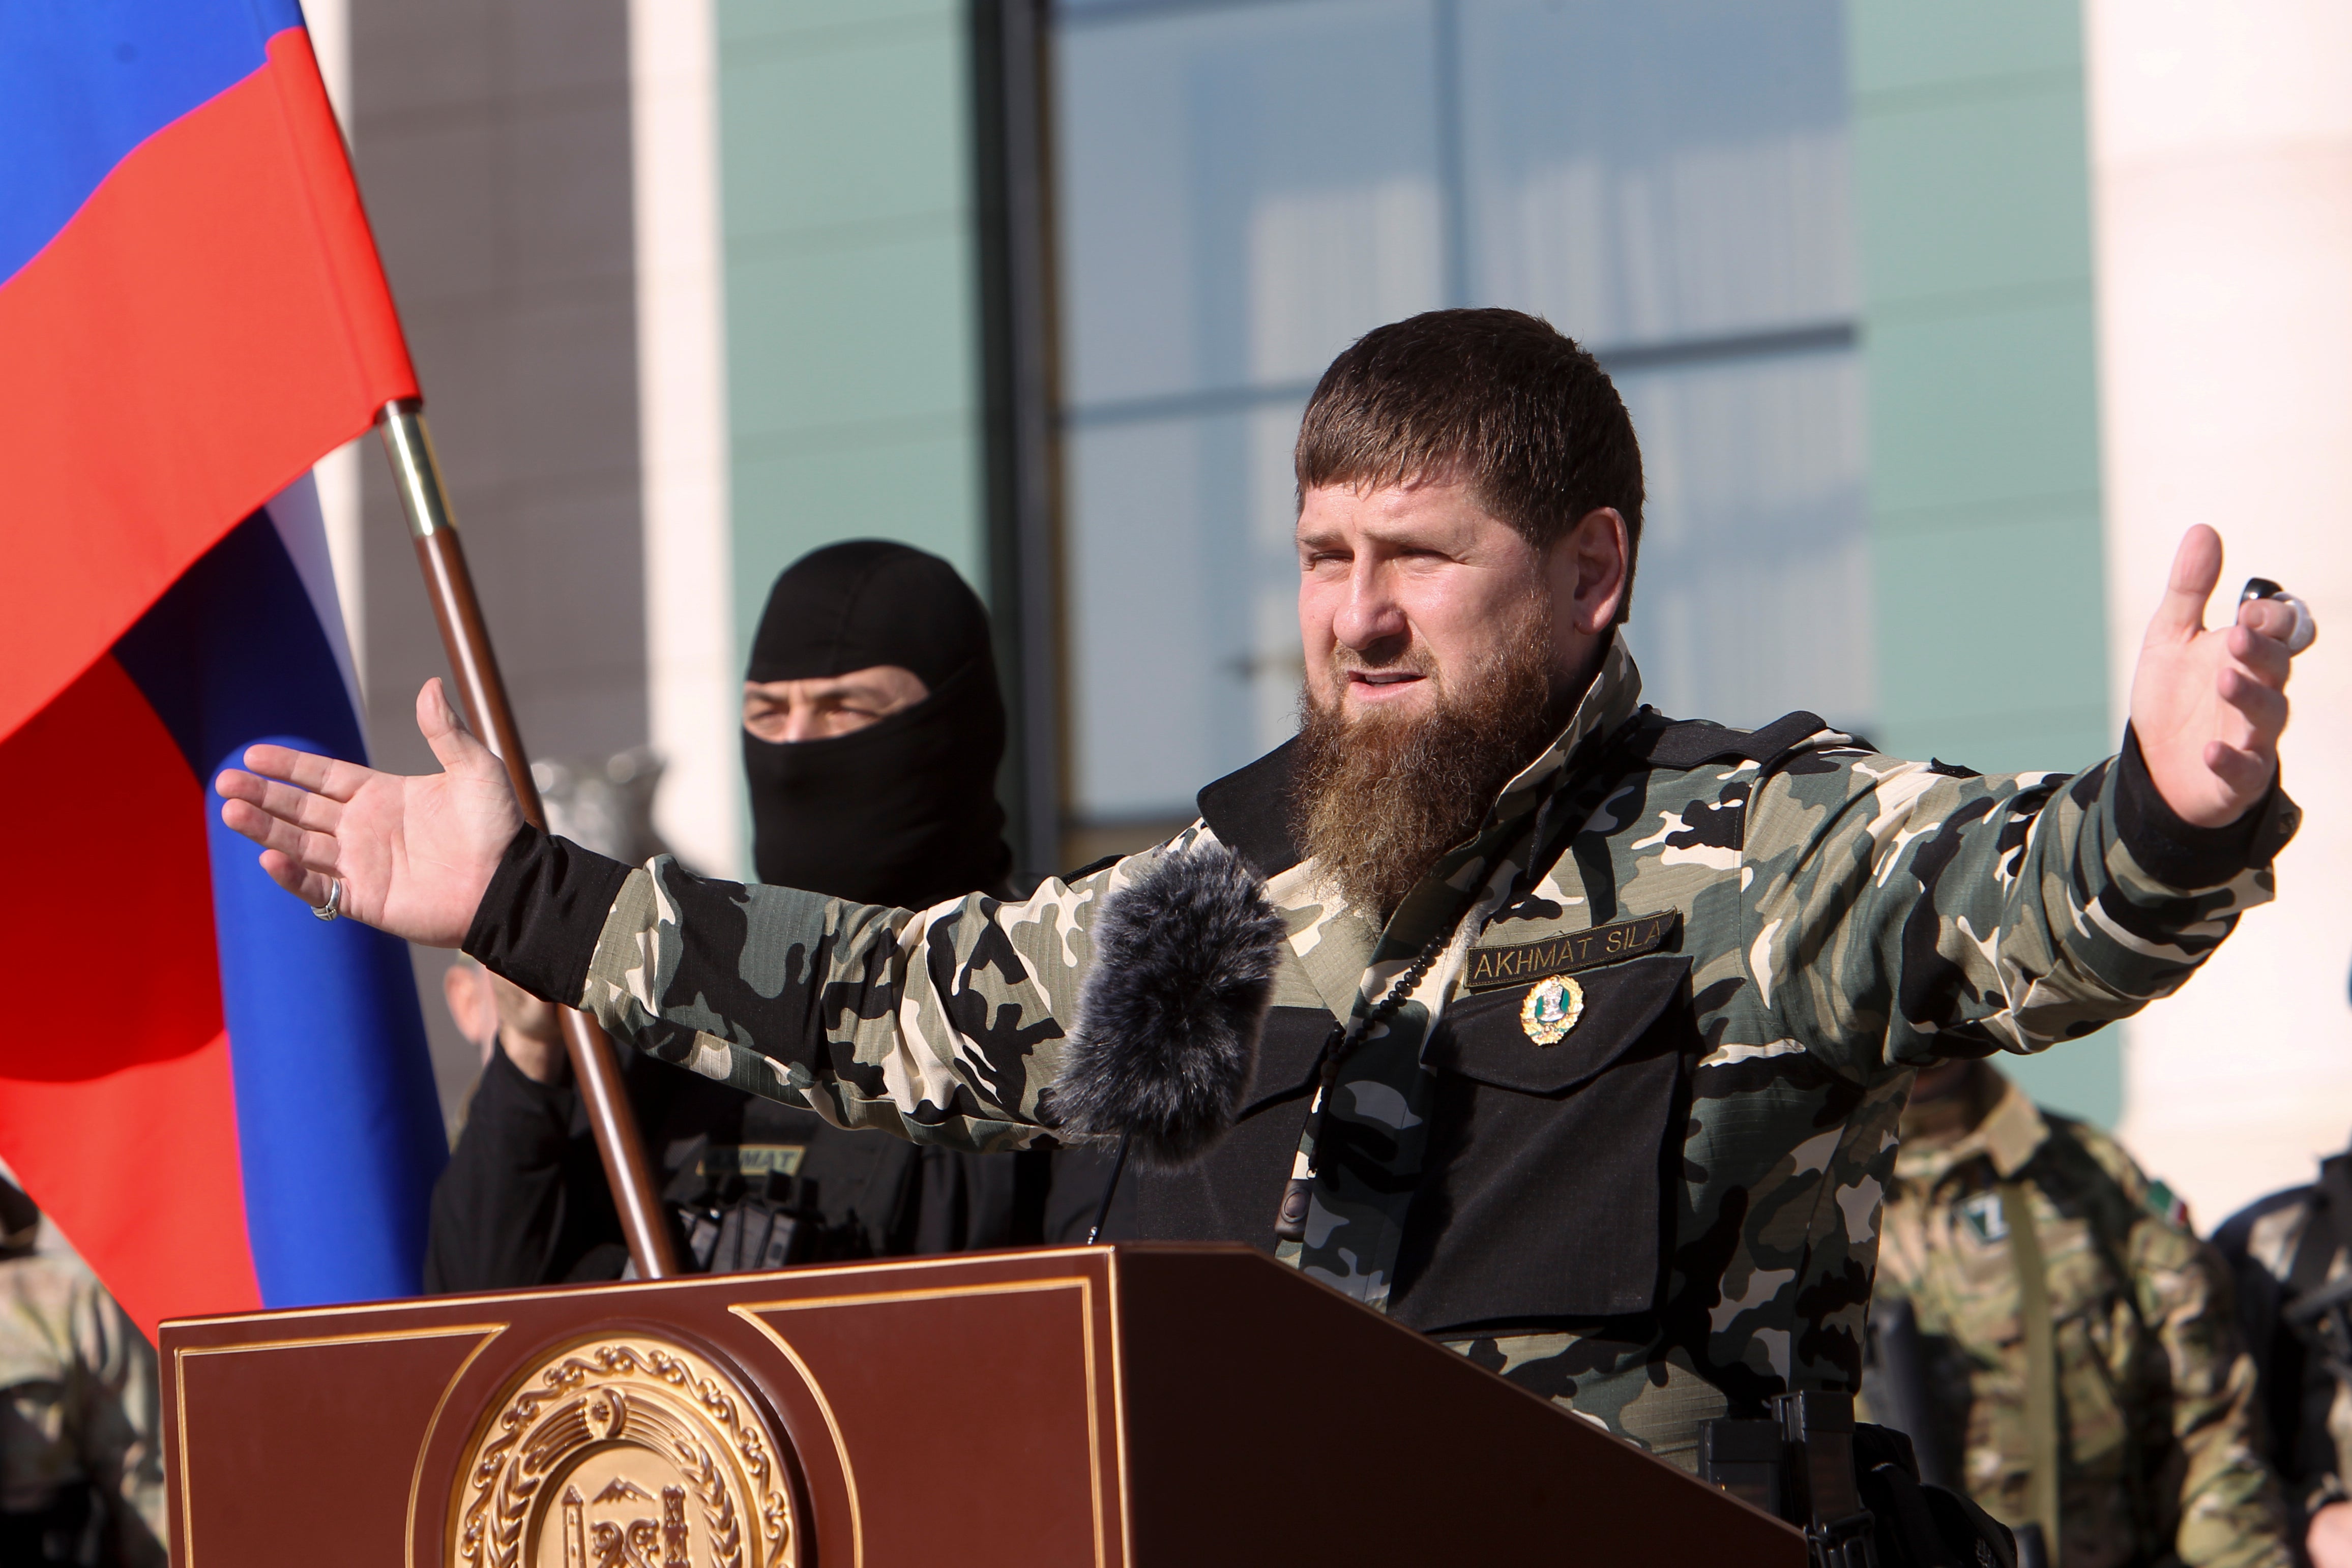 Kadyrov gestures while speaking to about 10,000 troops in Grozny, 29 March 2022